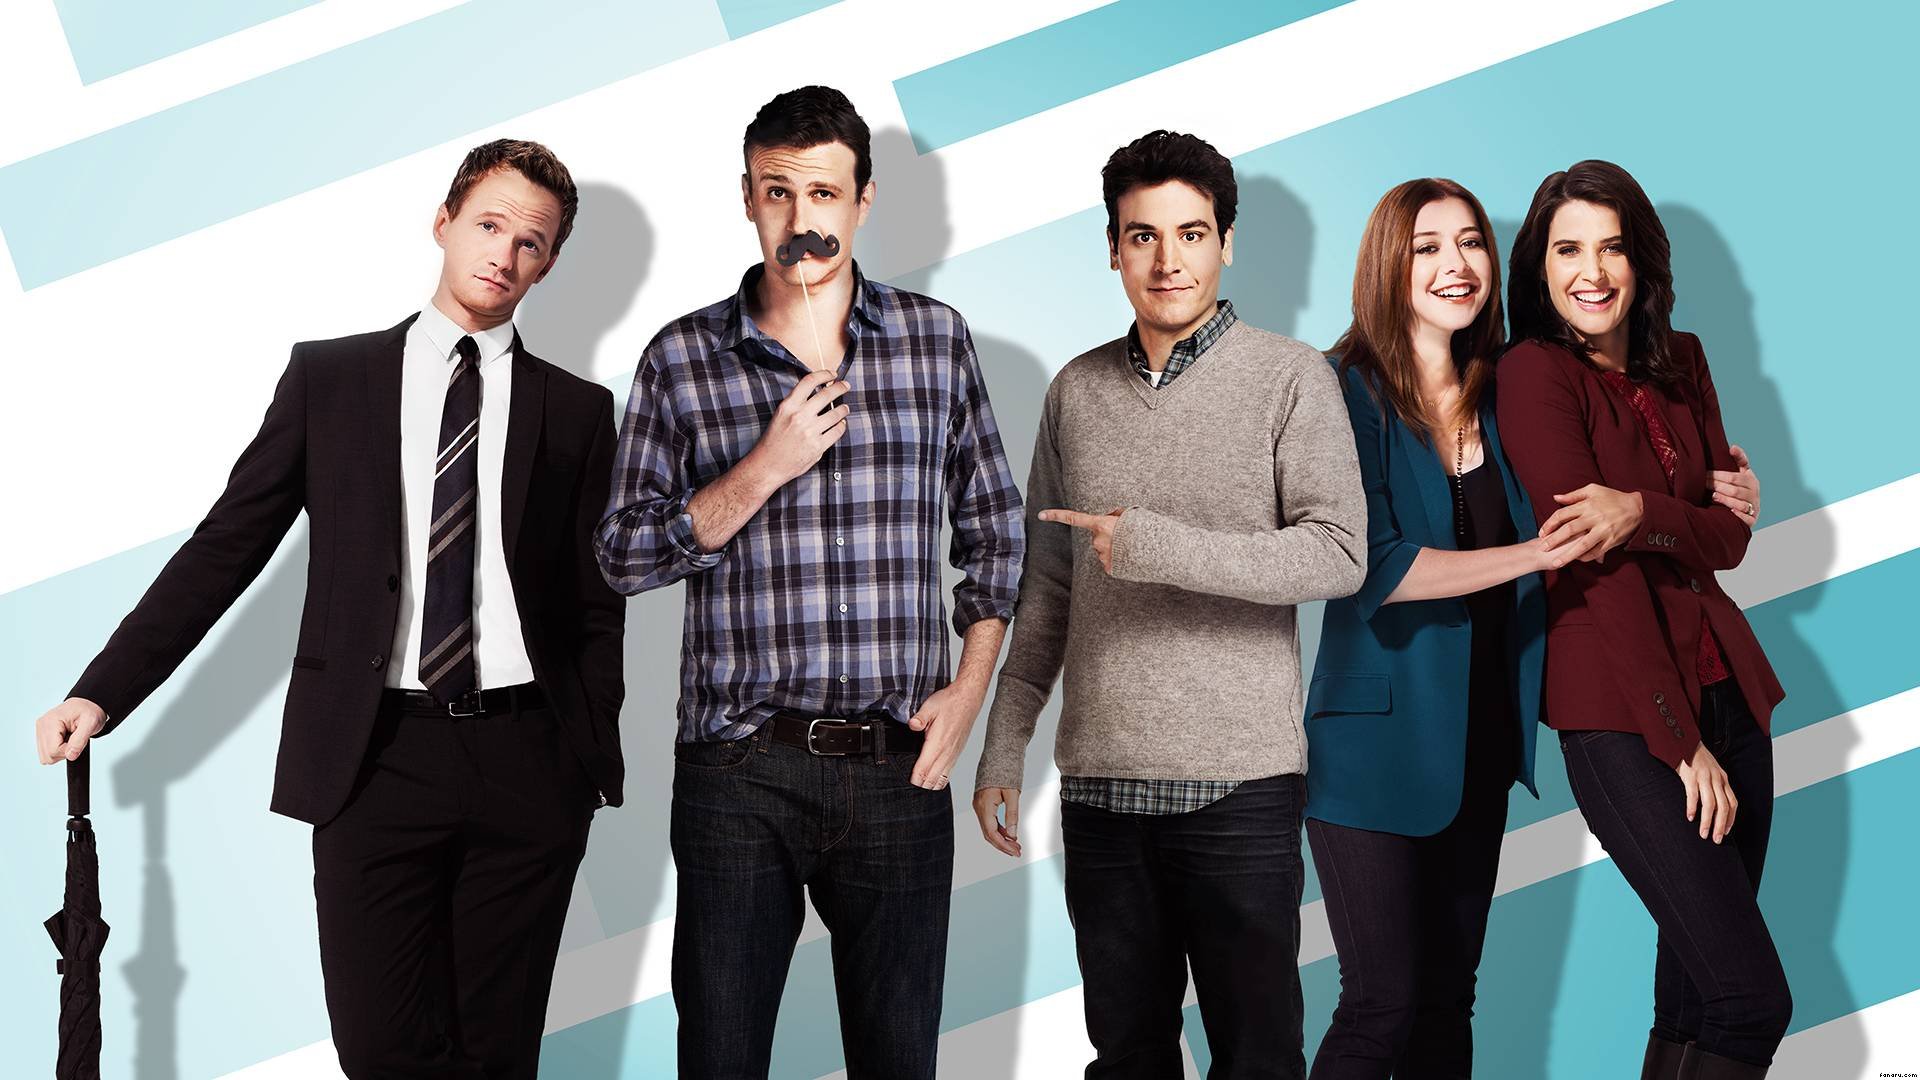 how i met your mother, Comedy, Sitcom, Series, Television, How, Met, Mother,  78 Wallpaper